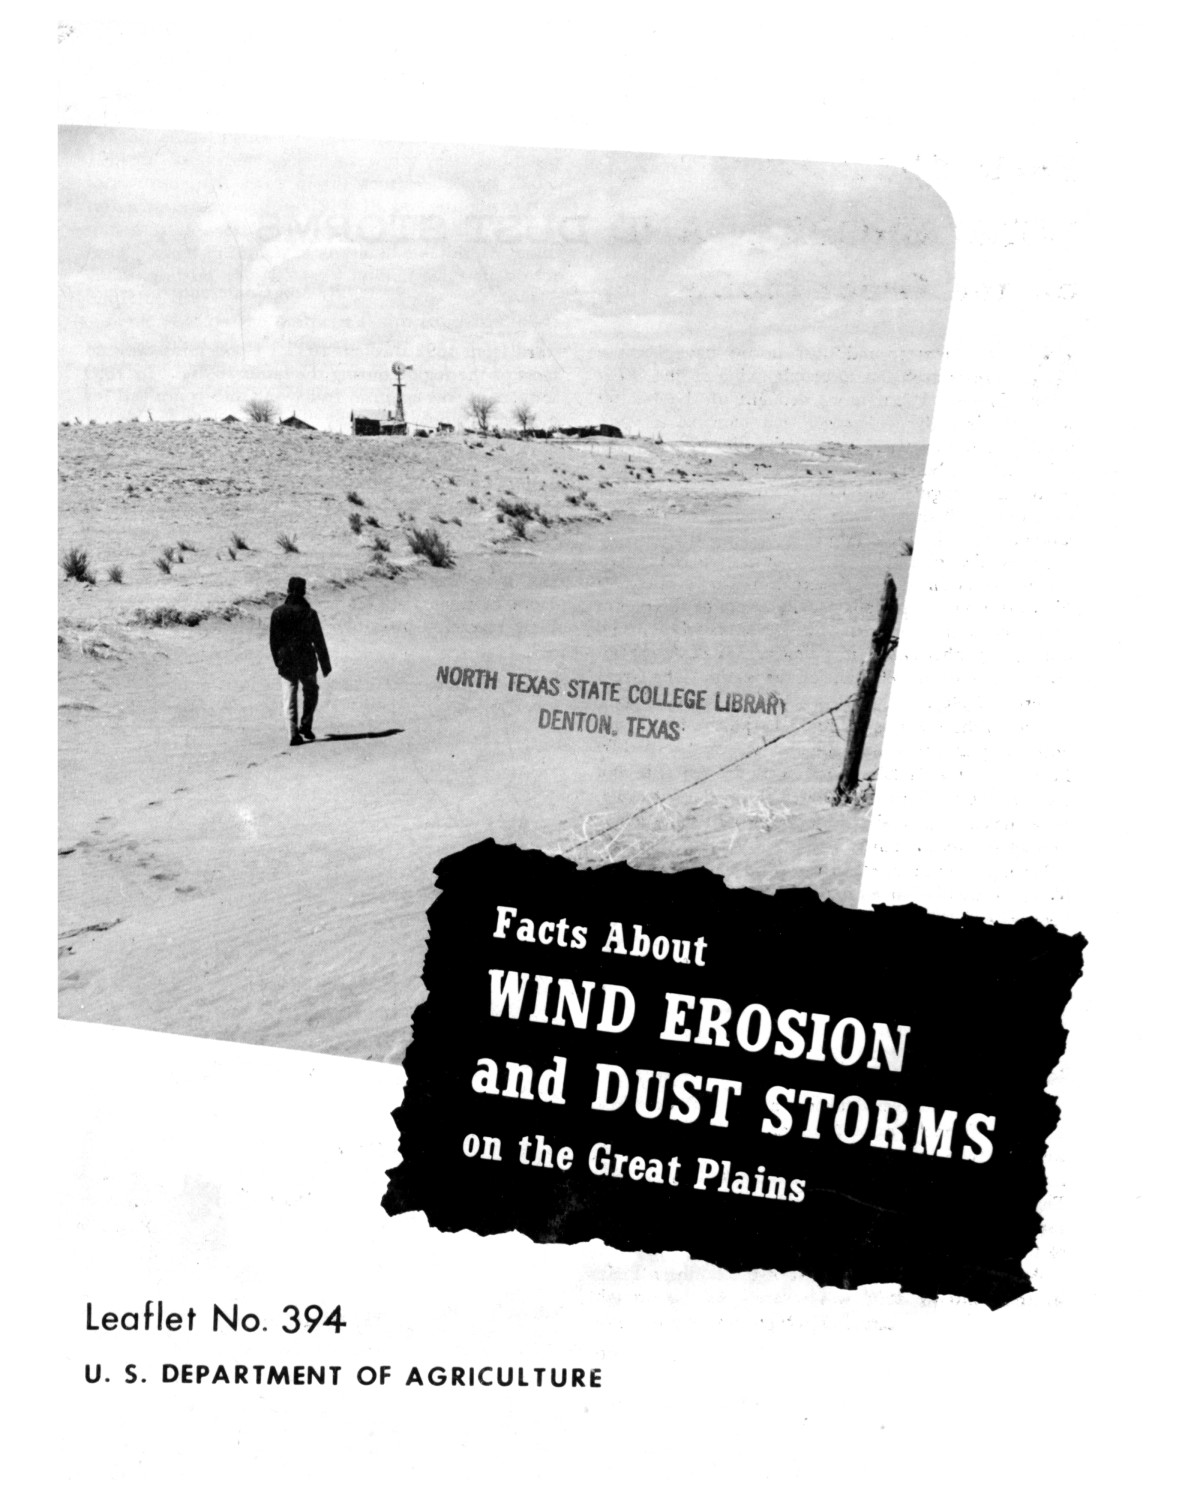 Facts About Wind Erosion and Dust Storms on the Great Plains.
                                                
                                                    1
                                                